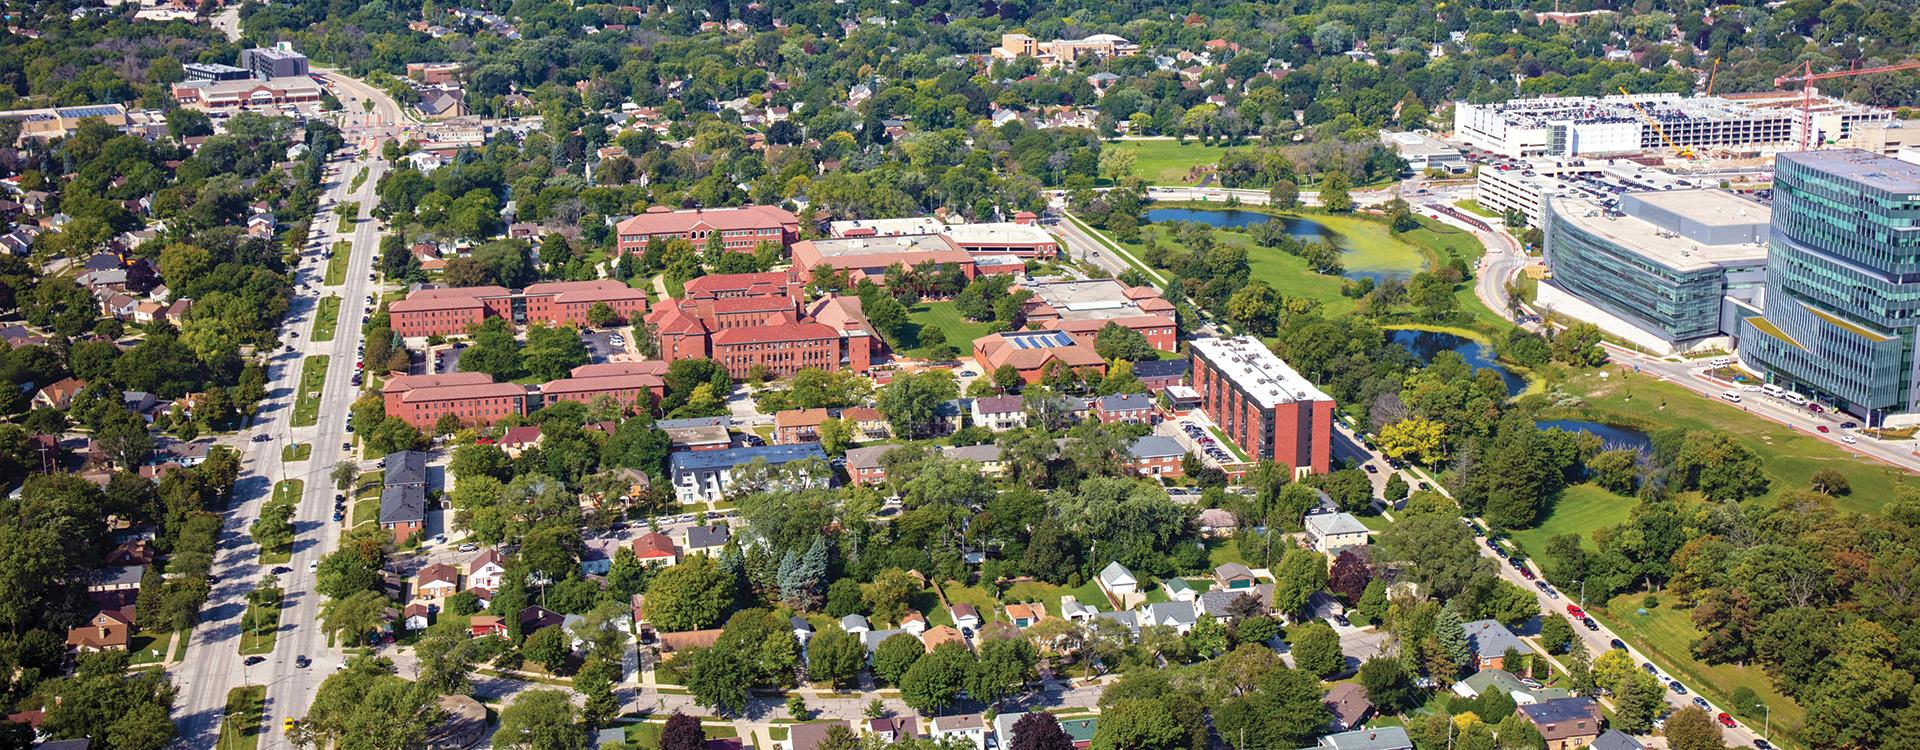 Aerial image of WLC campus and surrounding neighborhoods